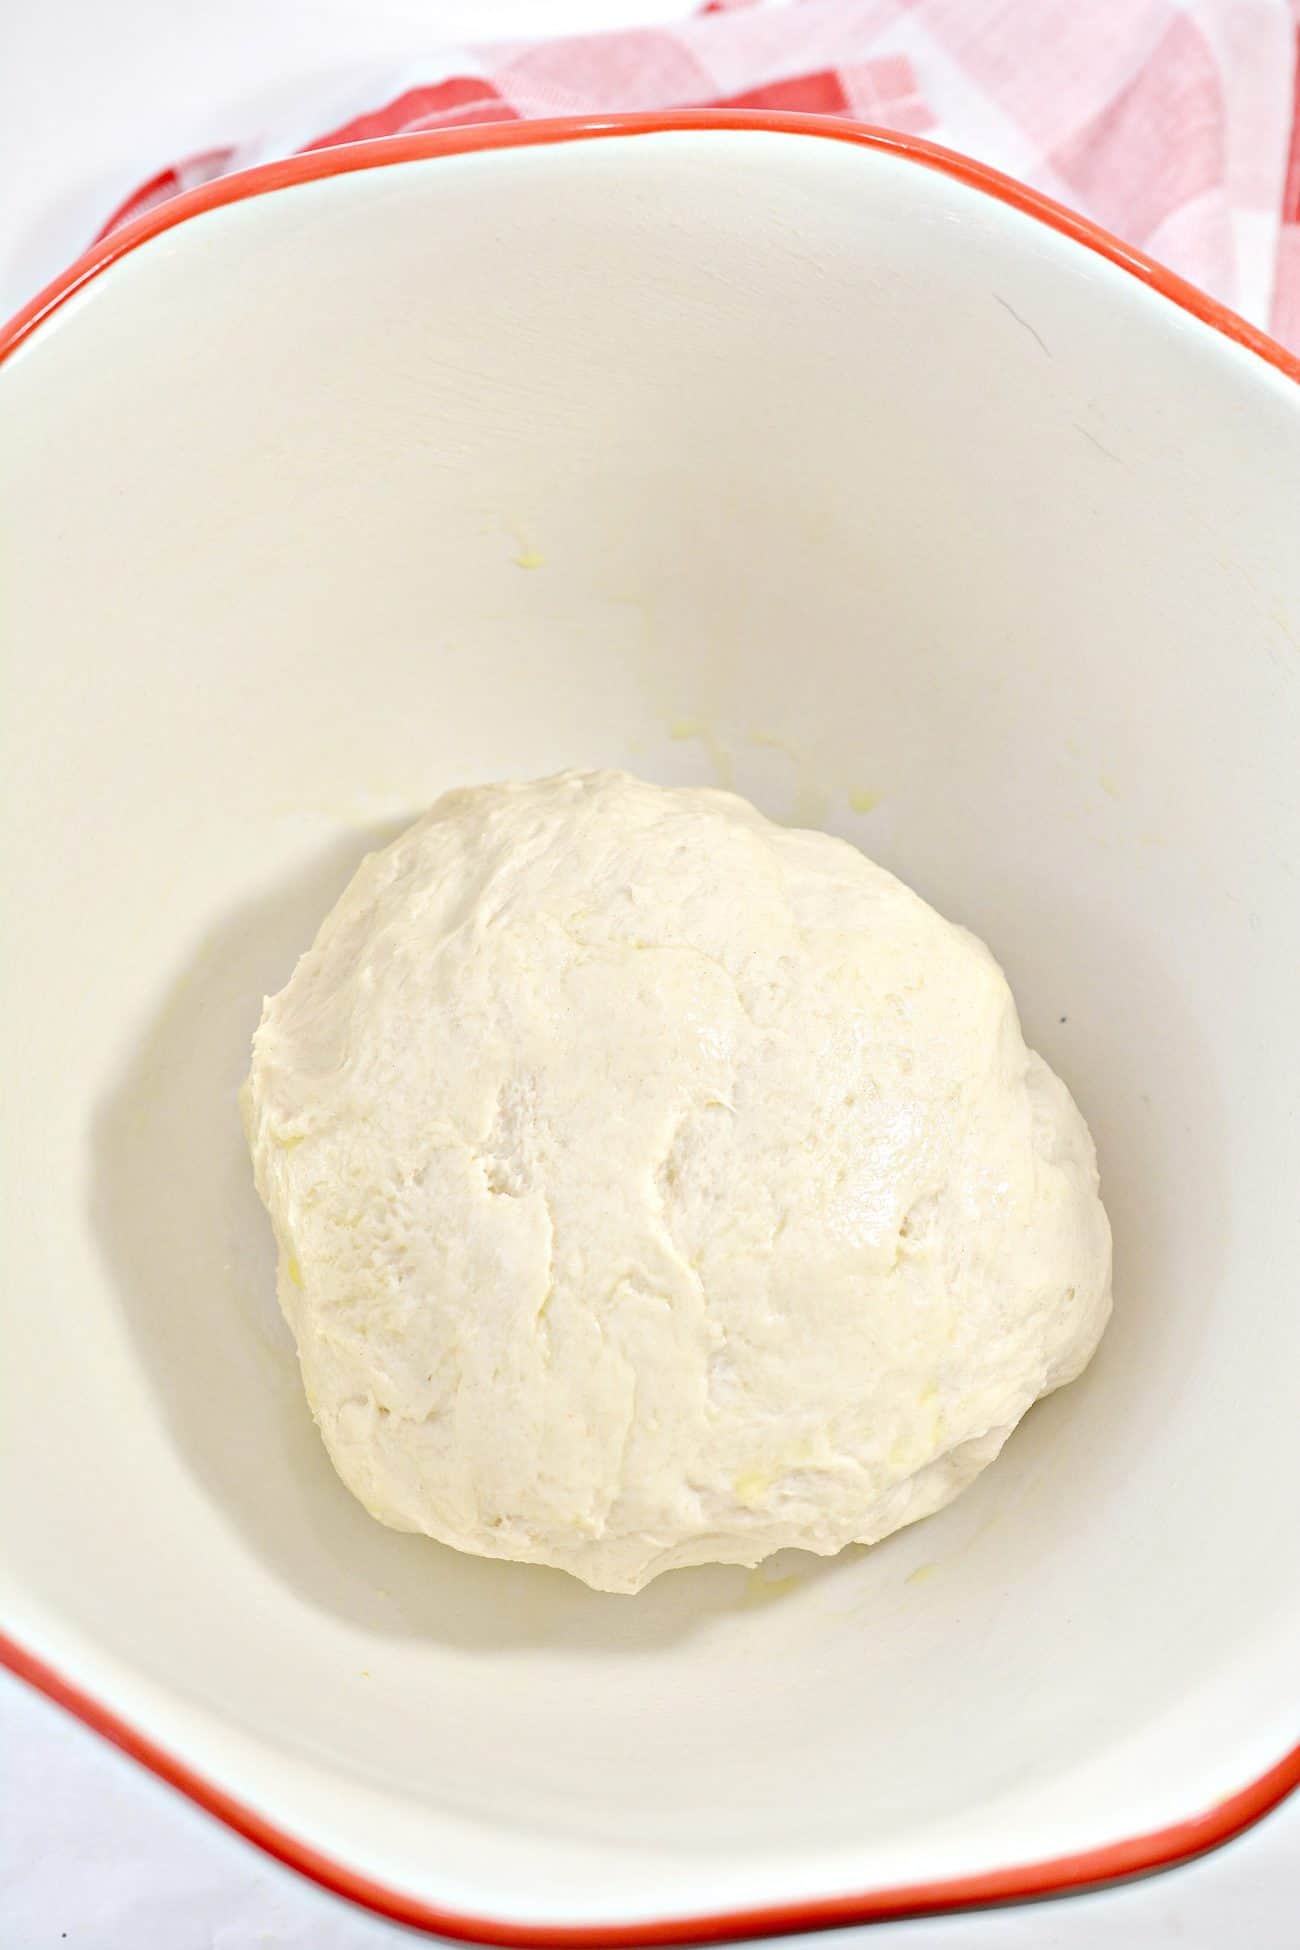 Place the dough in a well-greased large bowl, and turn over a few times to coat it well so it does not stick.